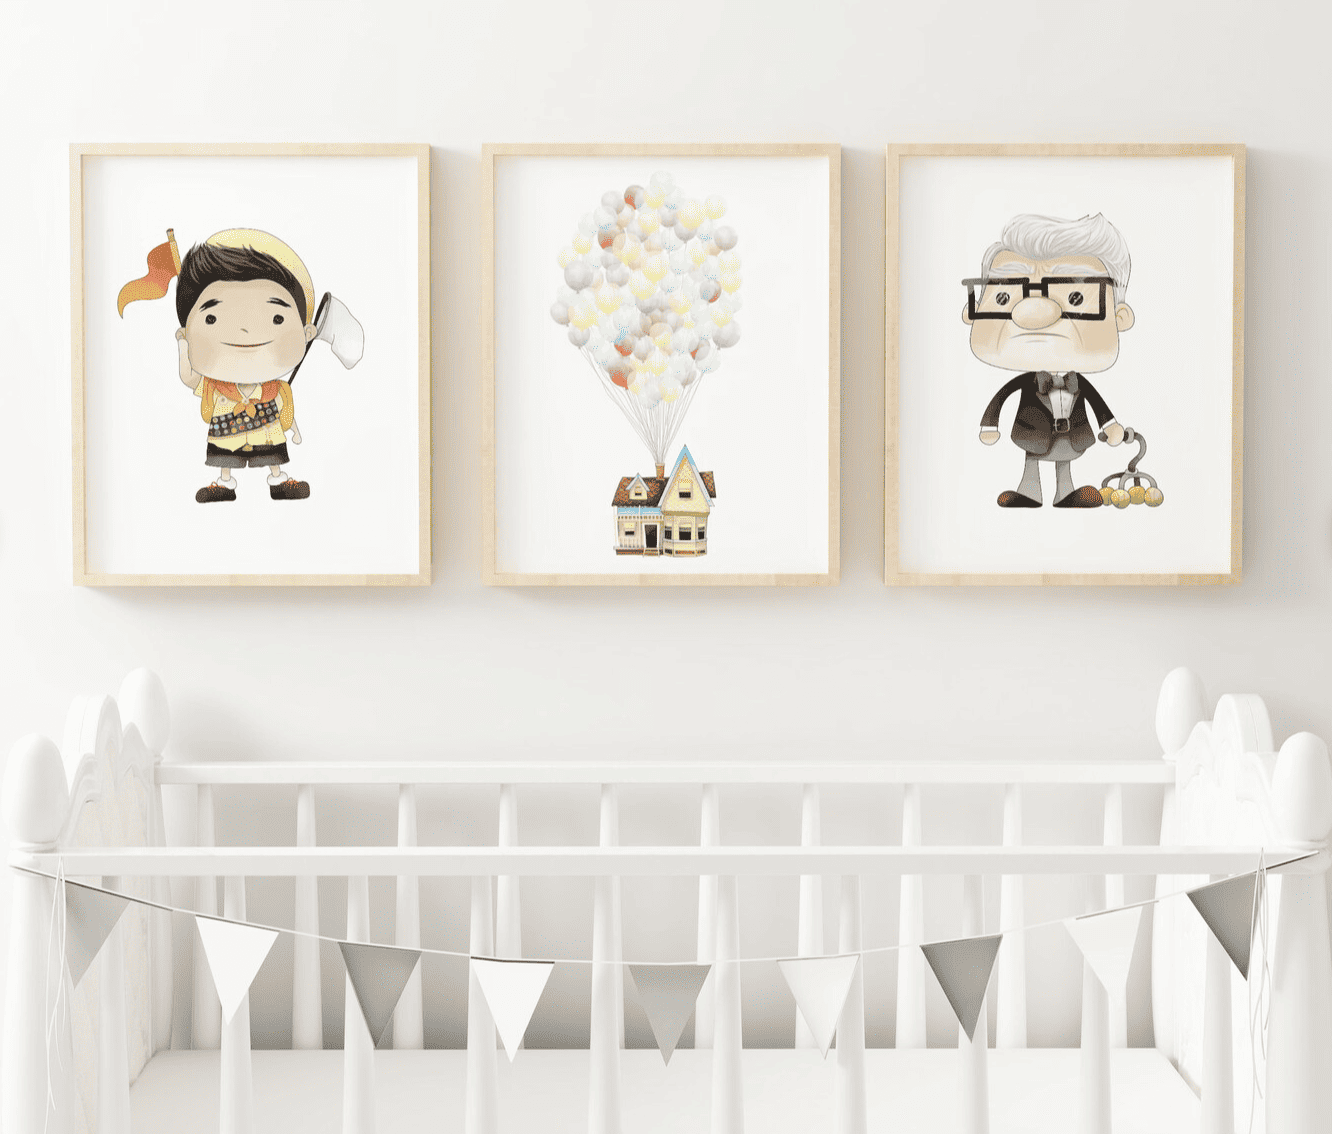 Up - Disney nursery ideas perfect for gender neutral Disney themed nurseries for magical inspiration!